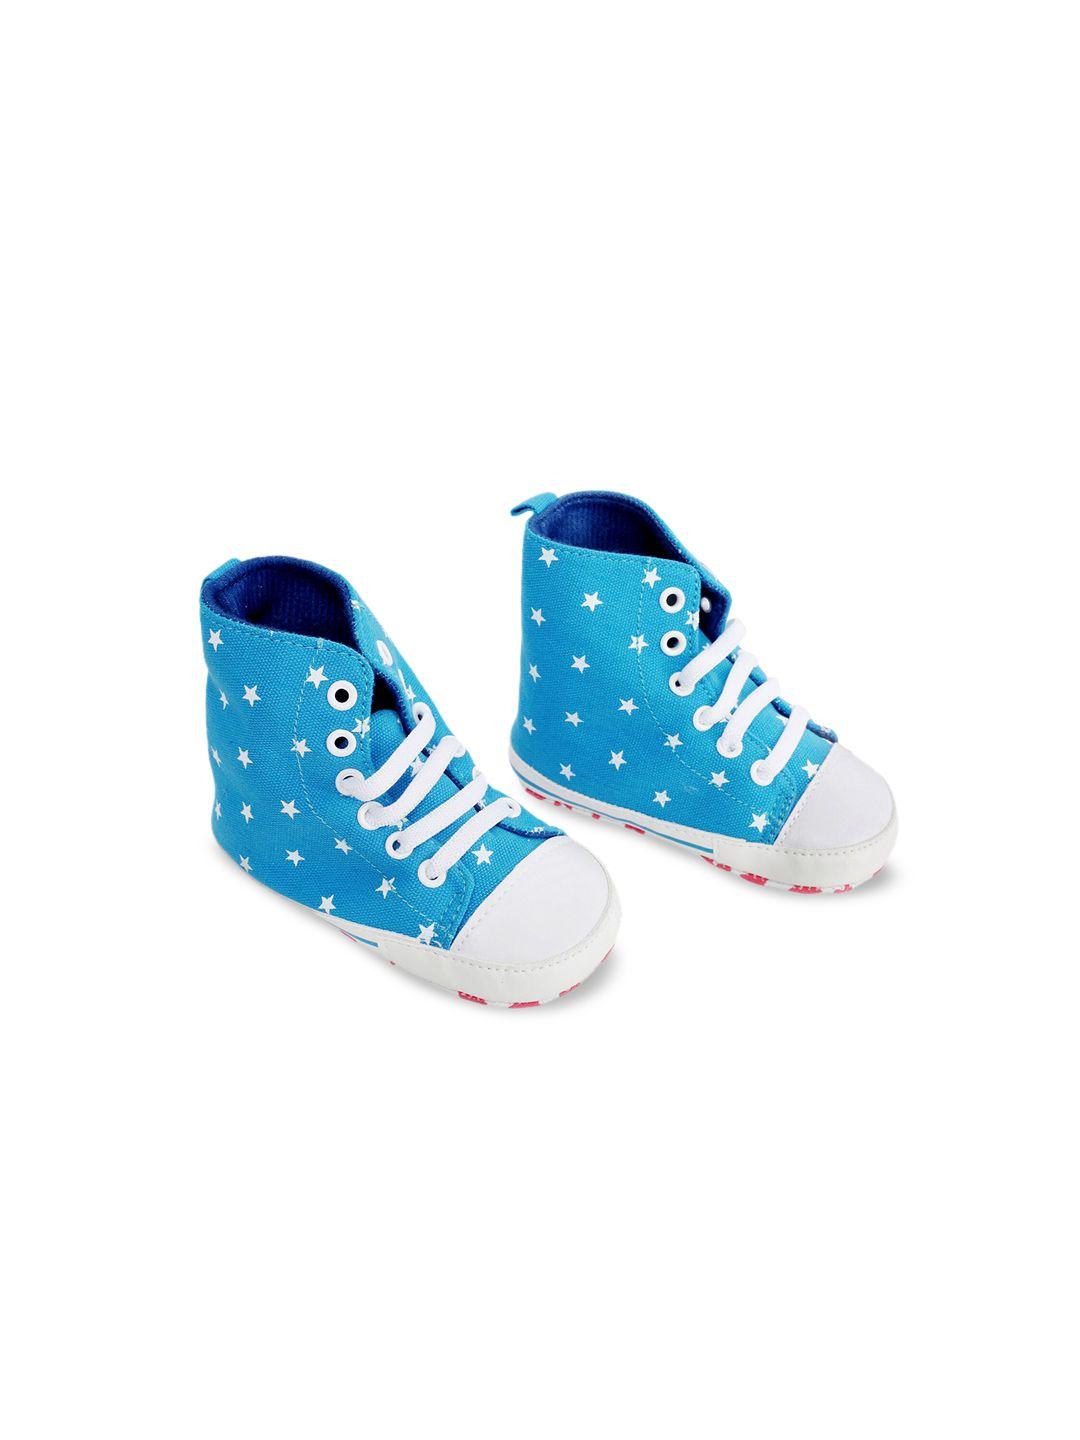 baby moo kids blue & white starry printed booties